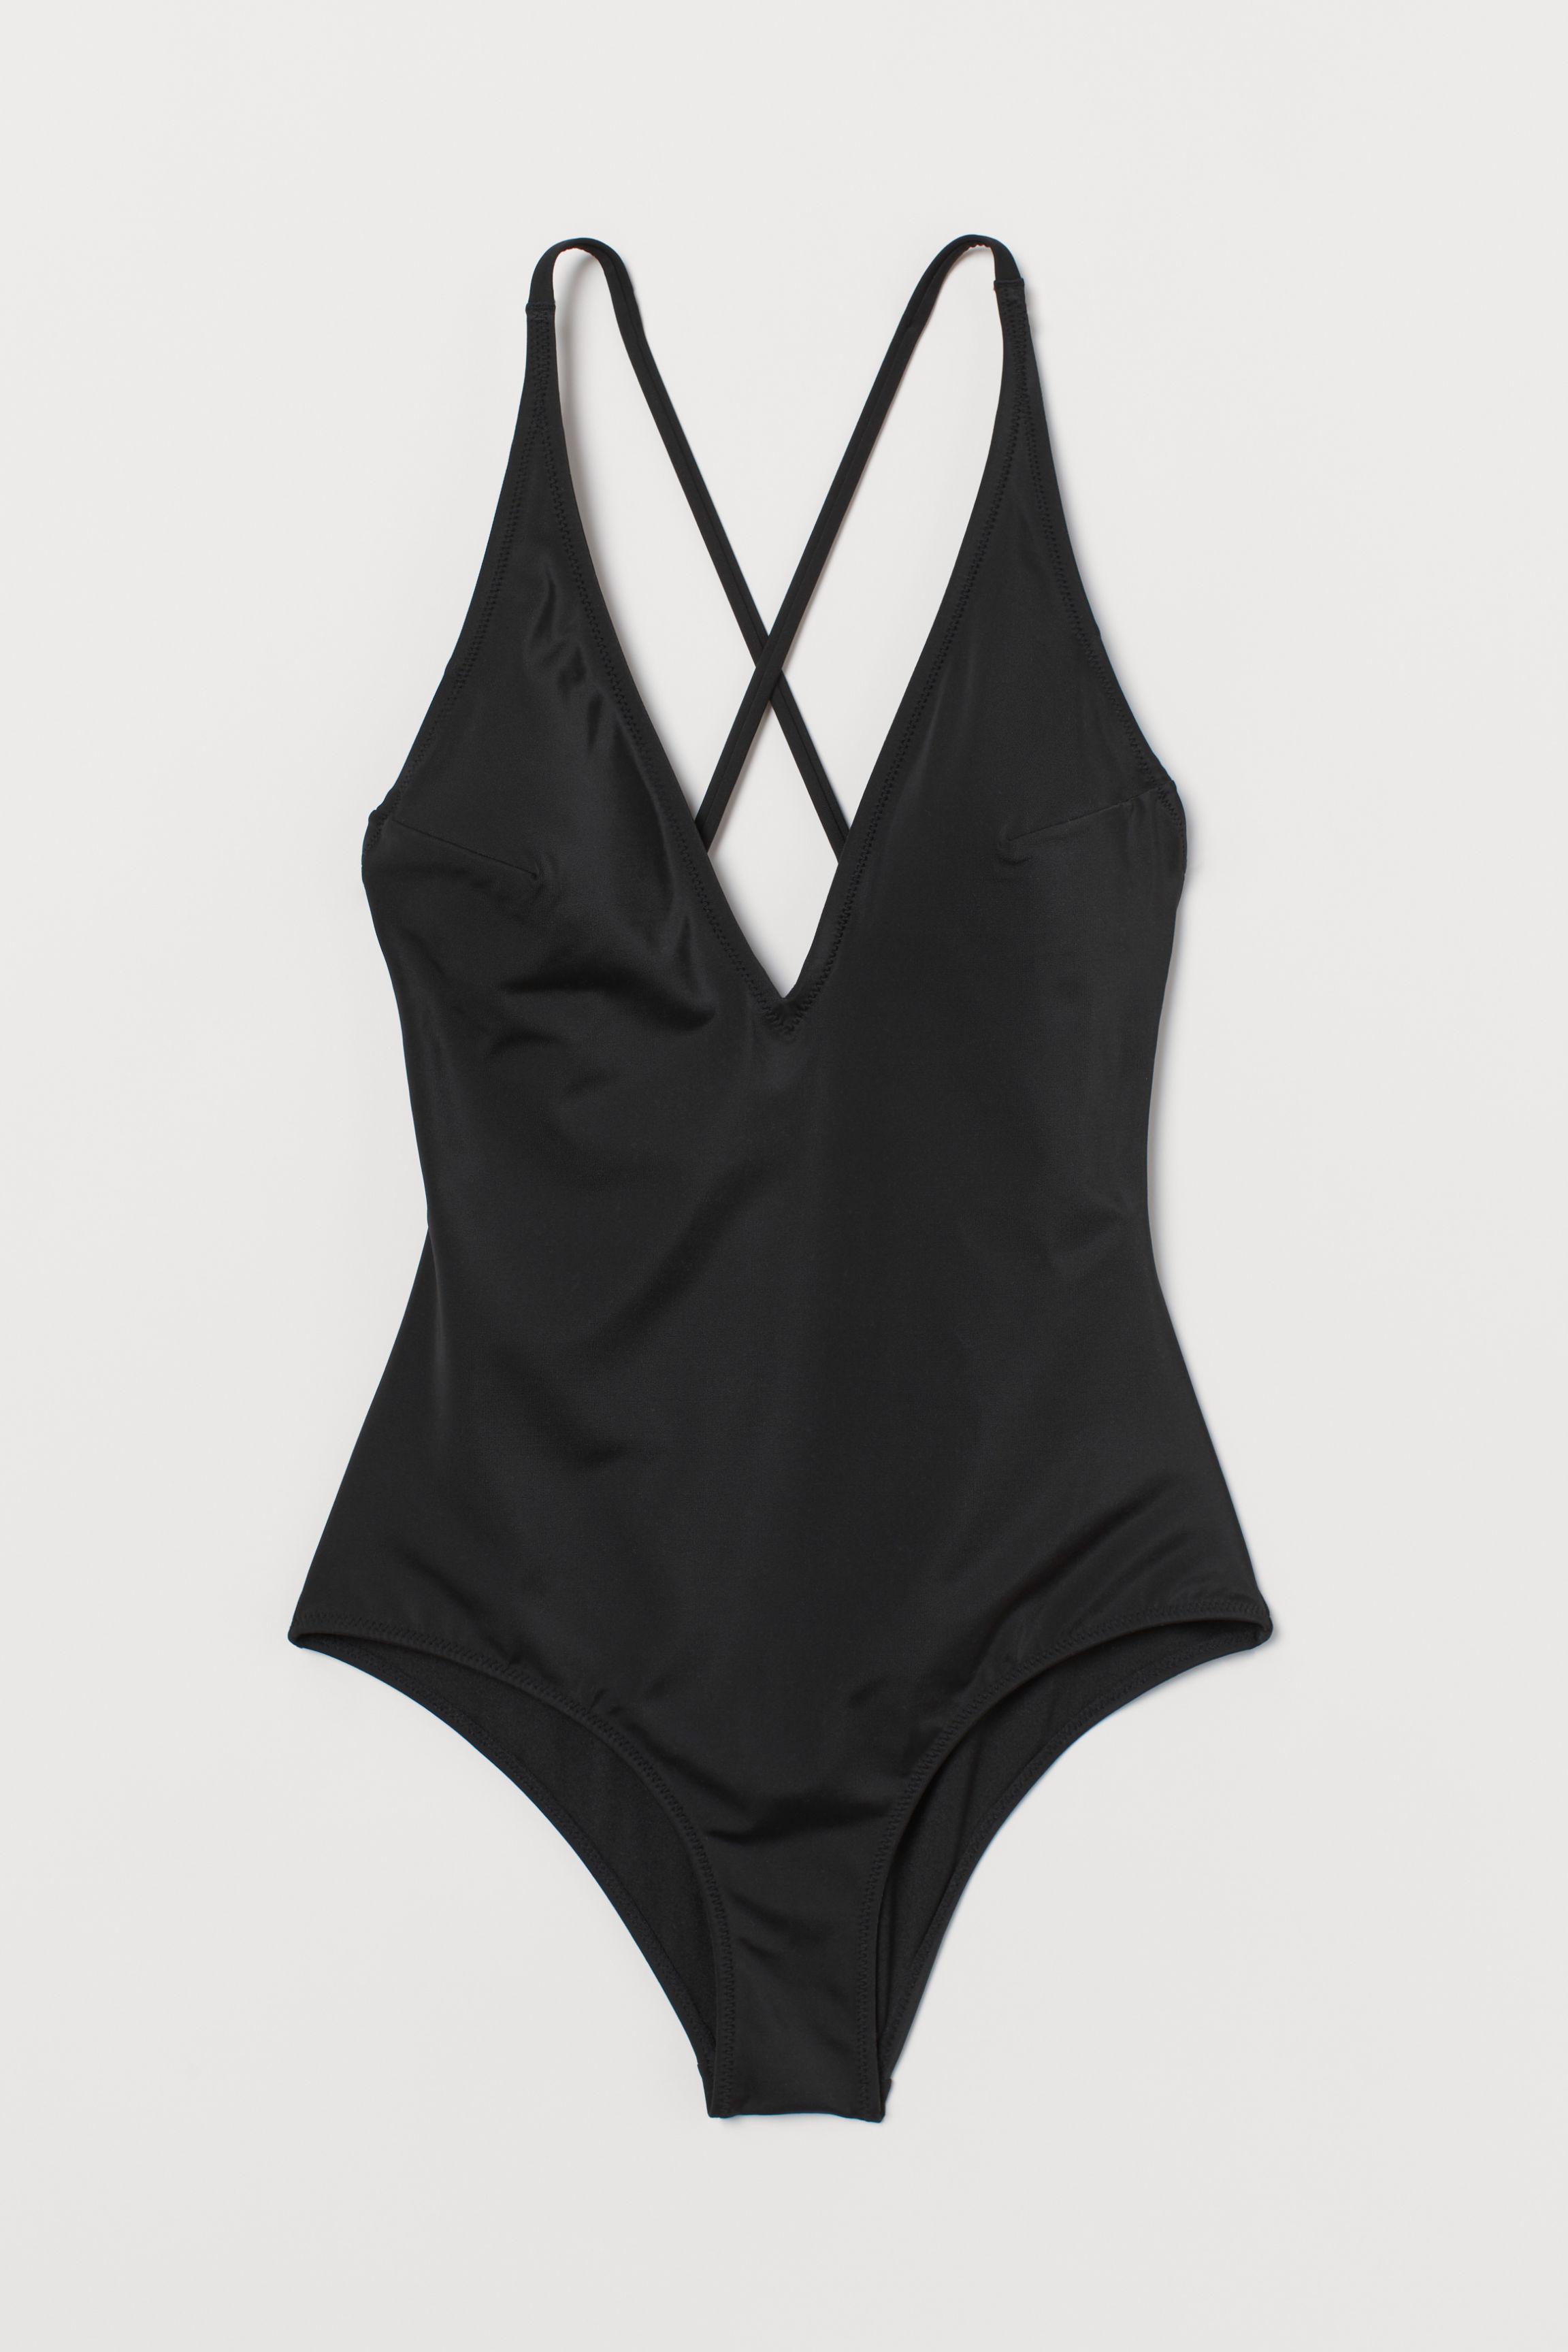 Handm V Neck Swimsuit In Black Lyst Free Download Nude Photo Gallery